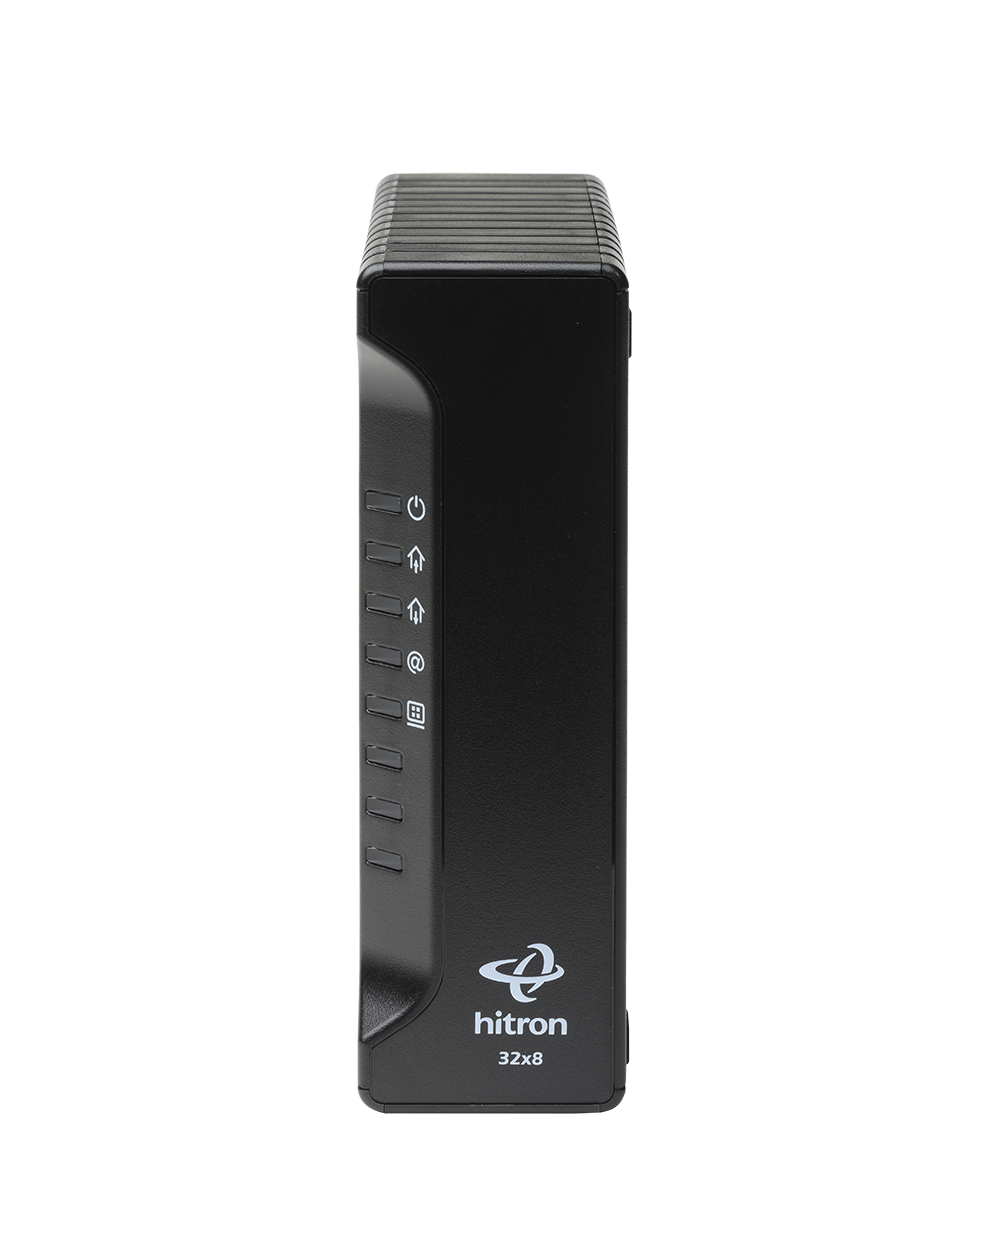 DOCSIS 3.0 Cable Modem from Hitron - CDA3-35